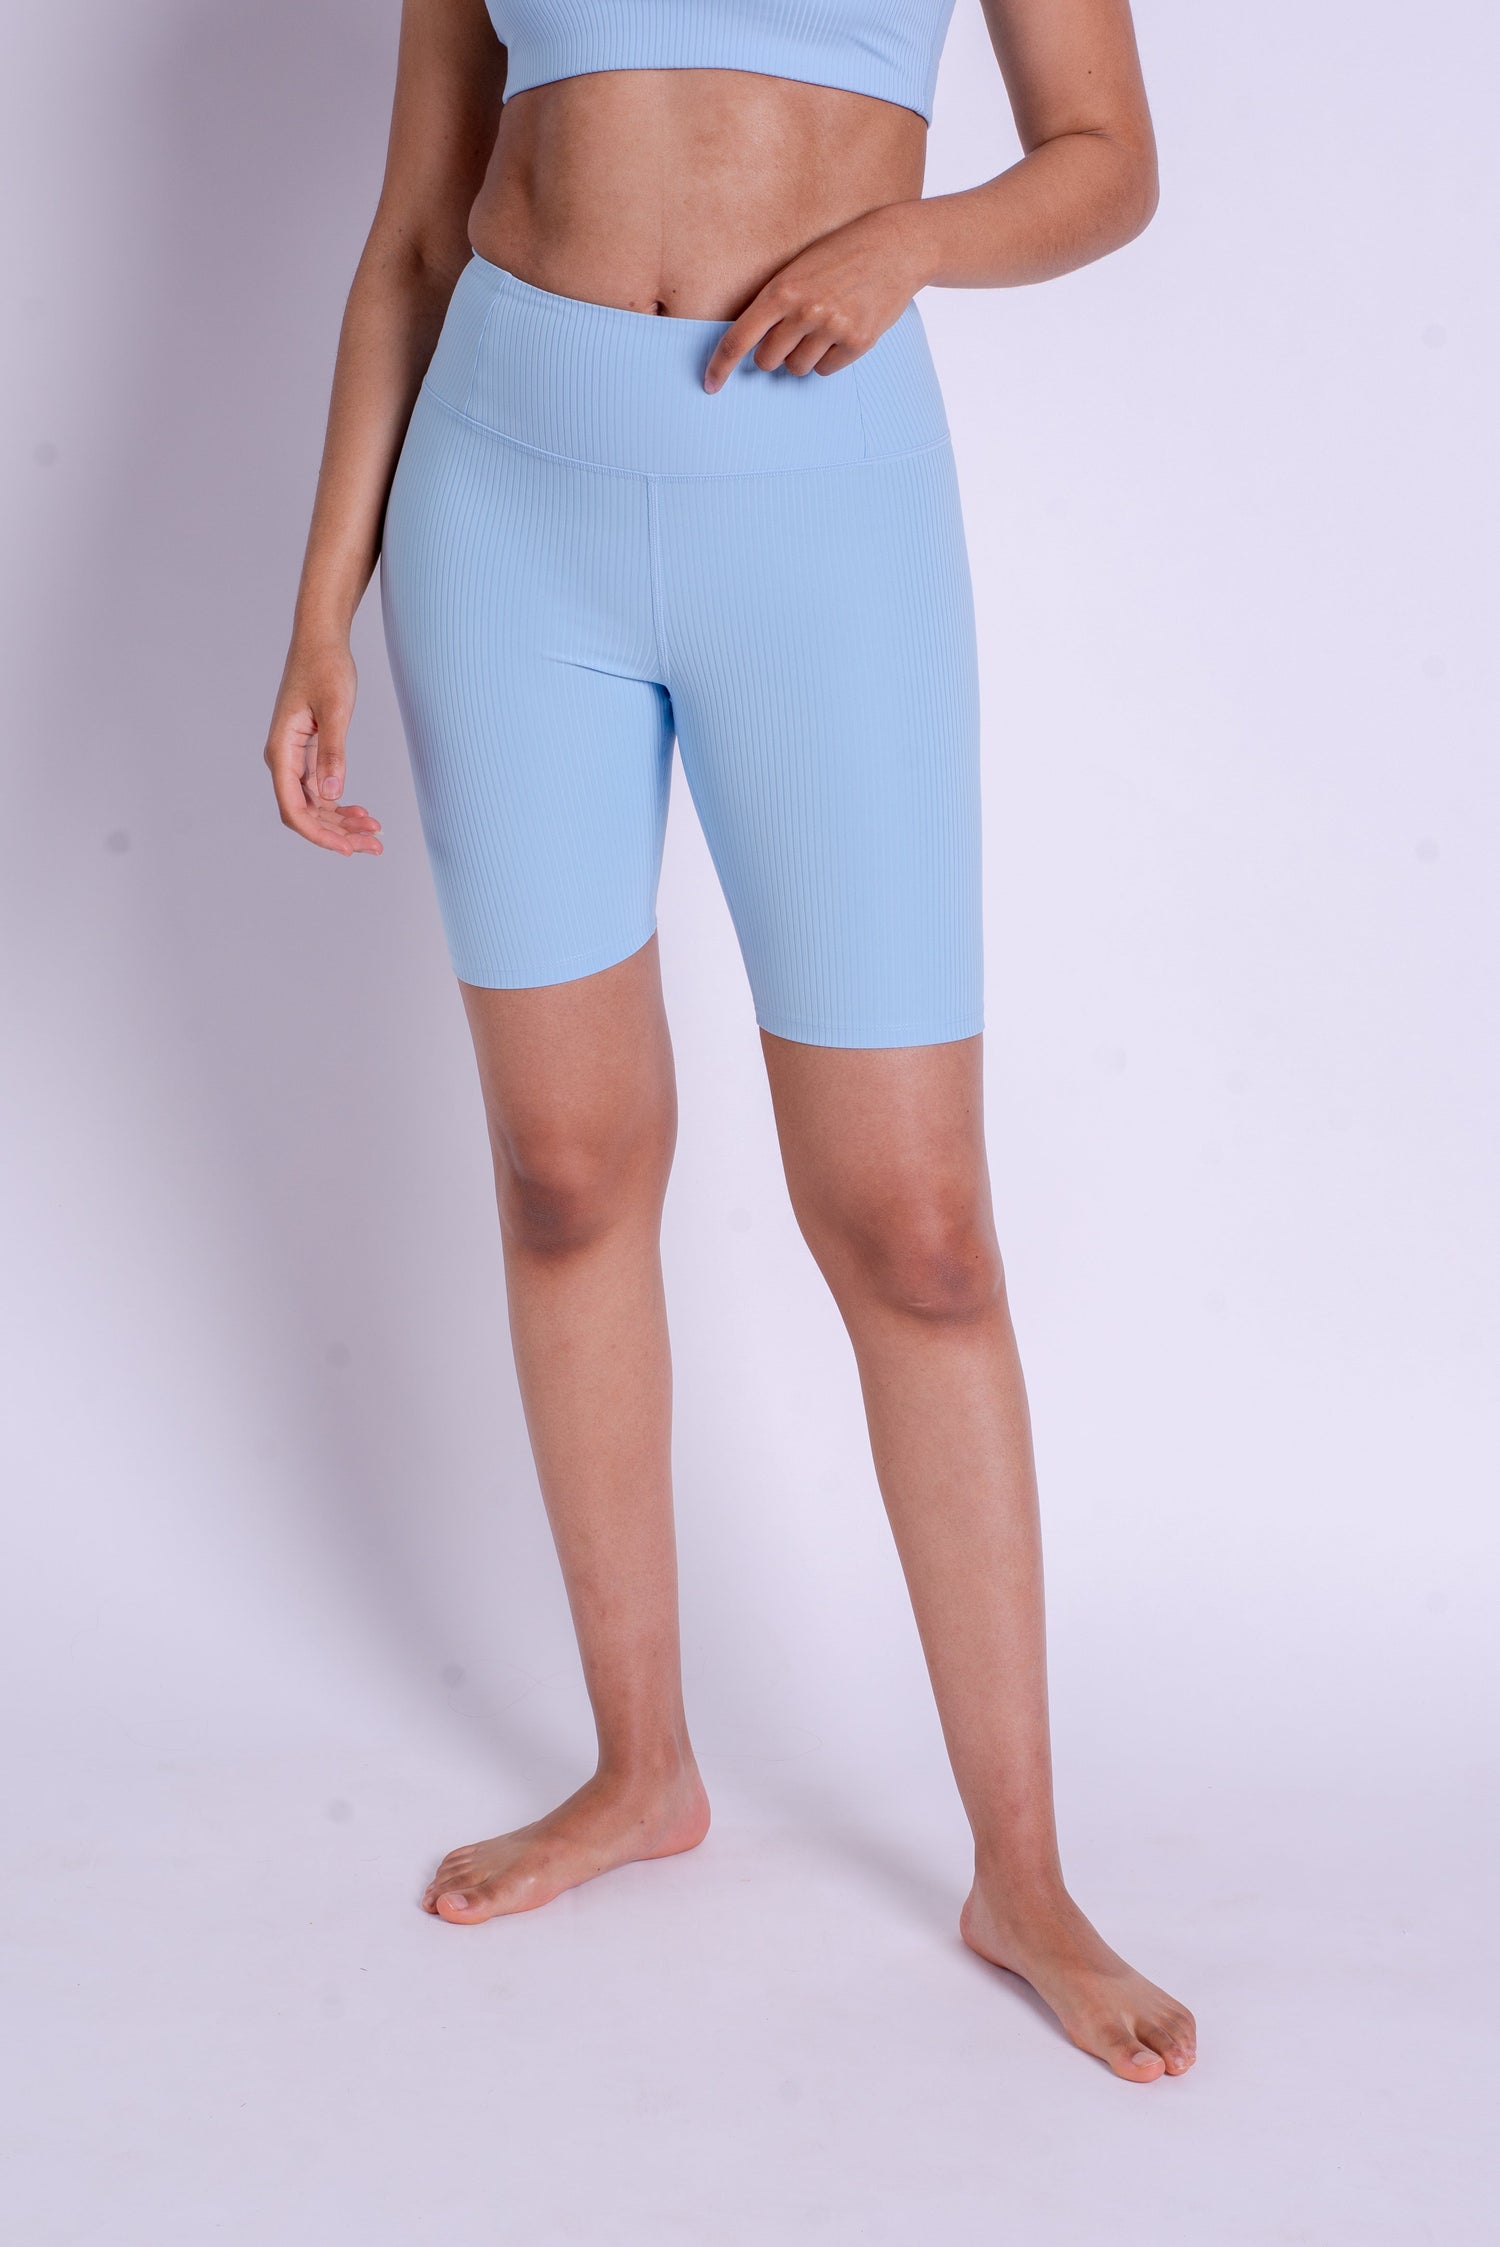 Girlfriend Collective - RIB Bike Shorts - Made from recycled plastic bottles - Weekendbee - sustainable sportswear